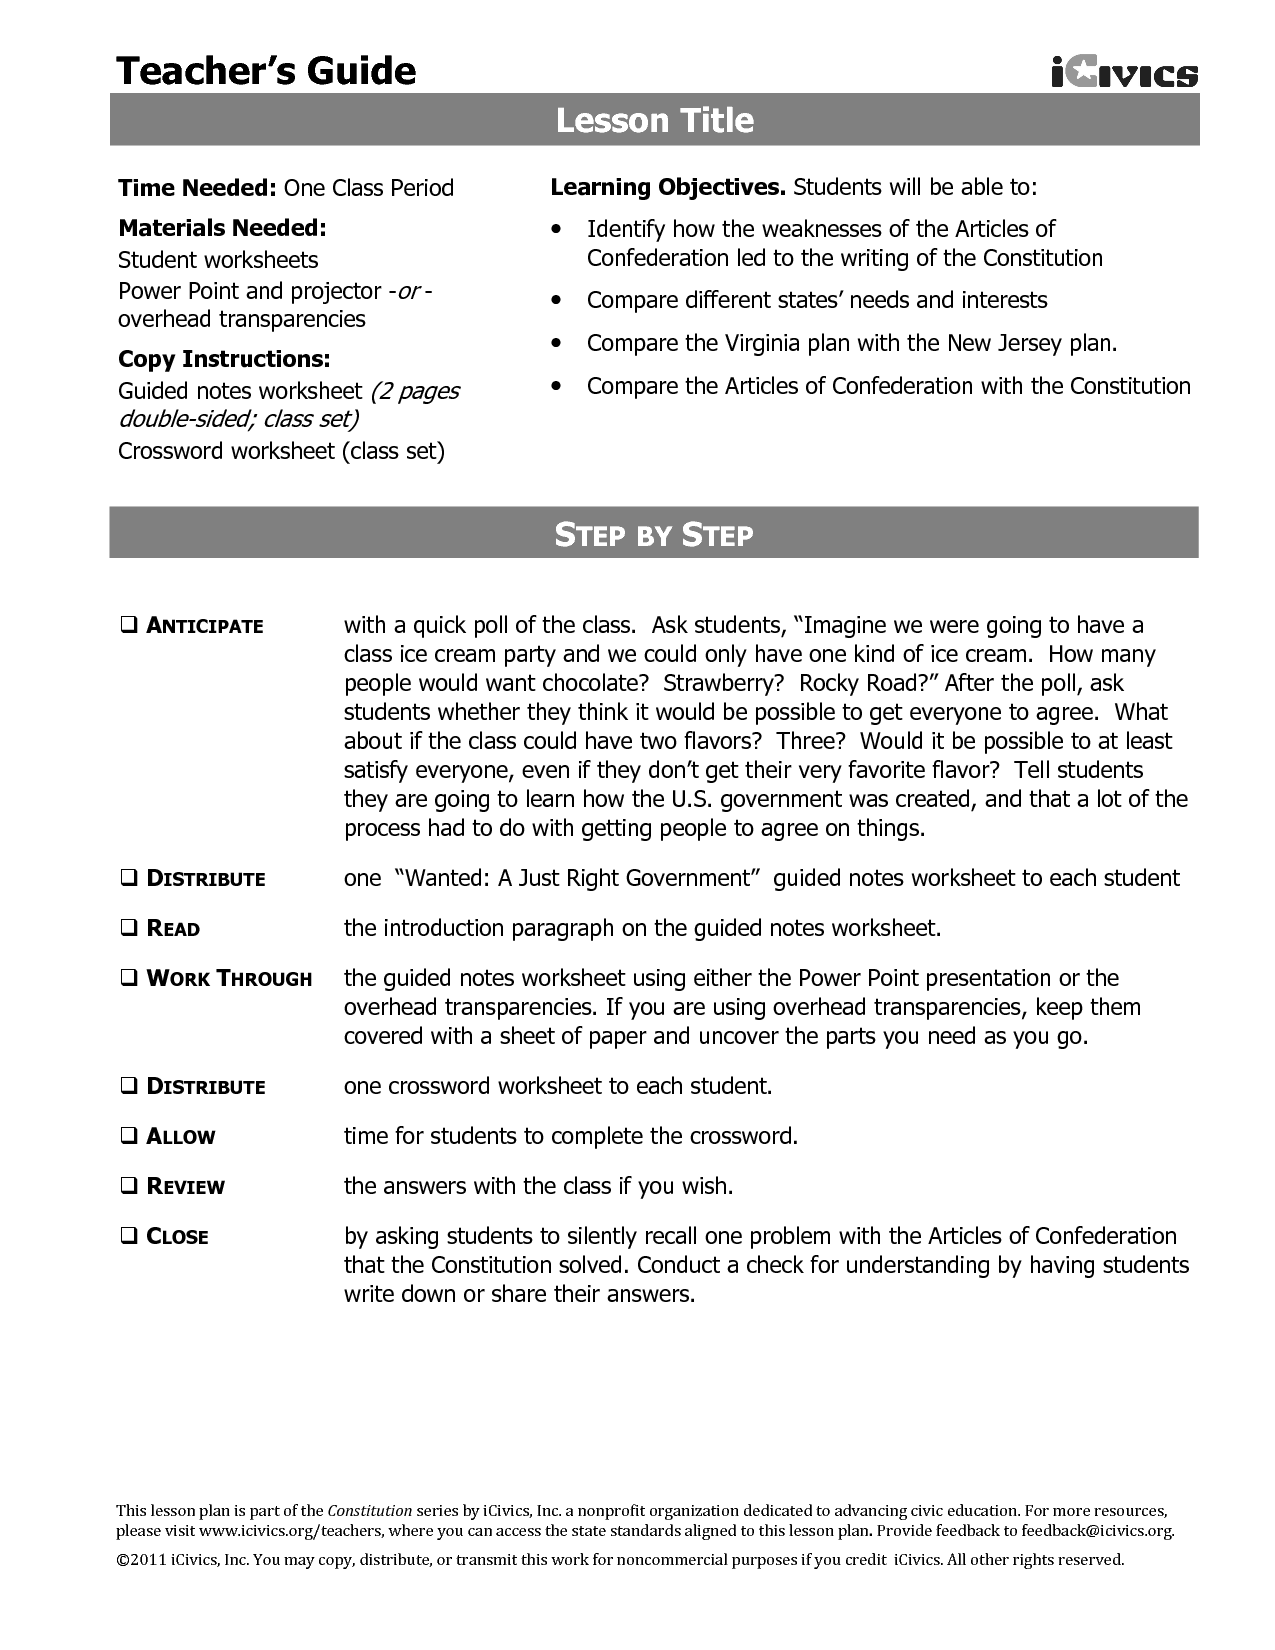 12 Best Images of Bill Of Rights Worksheet ICivics - I ...